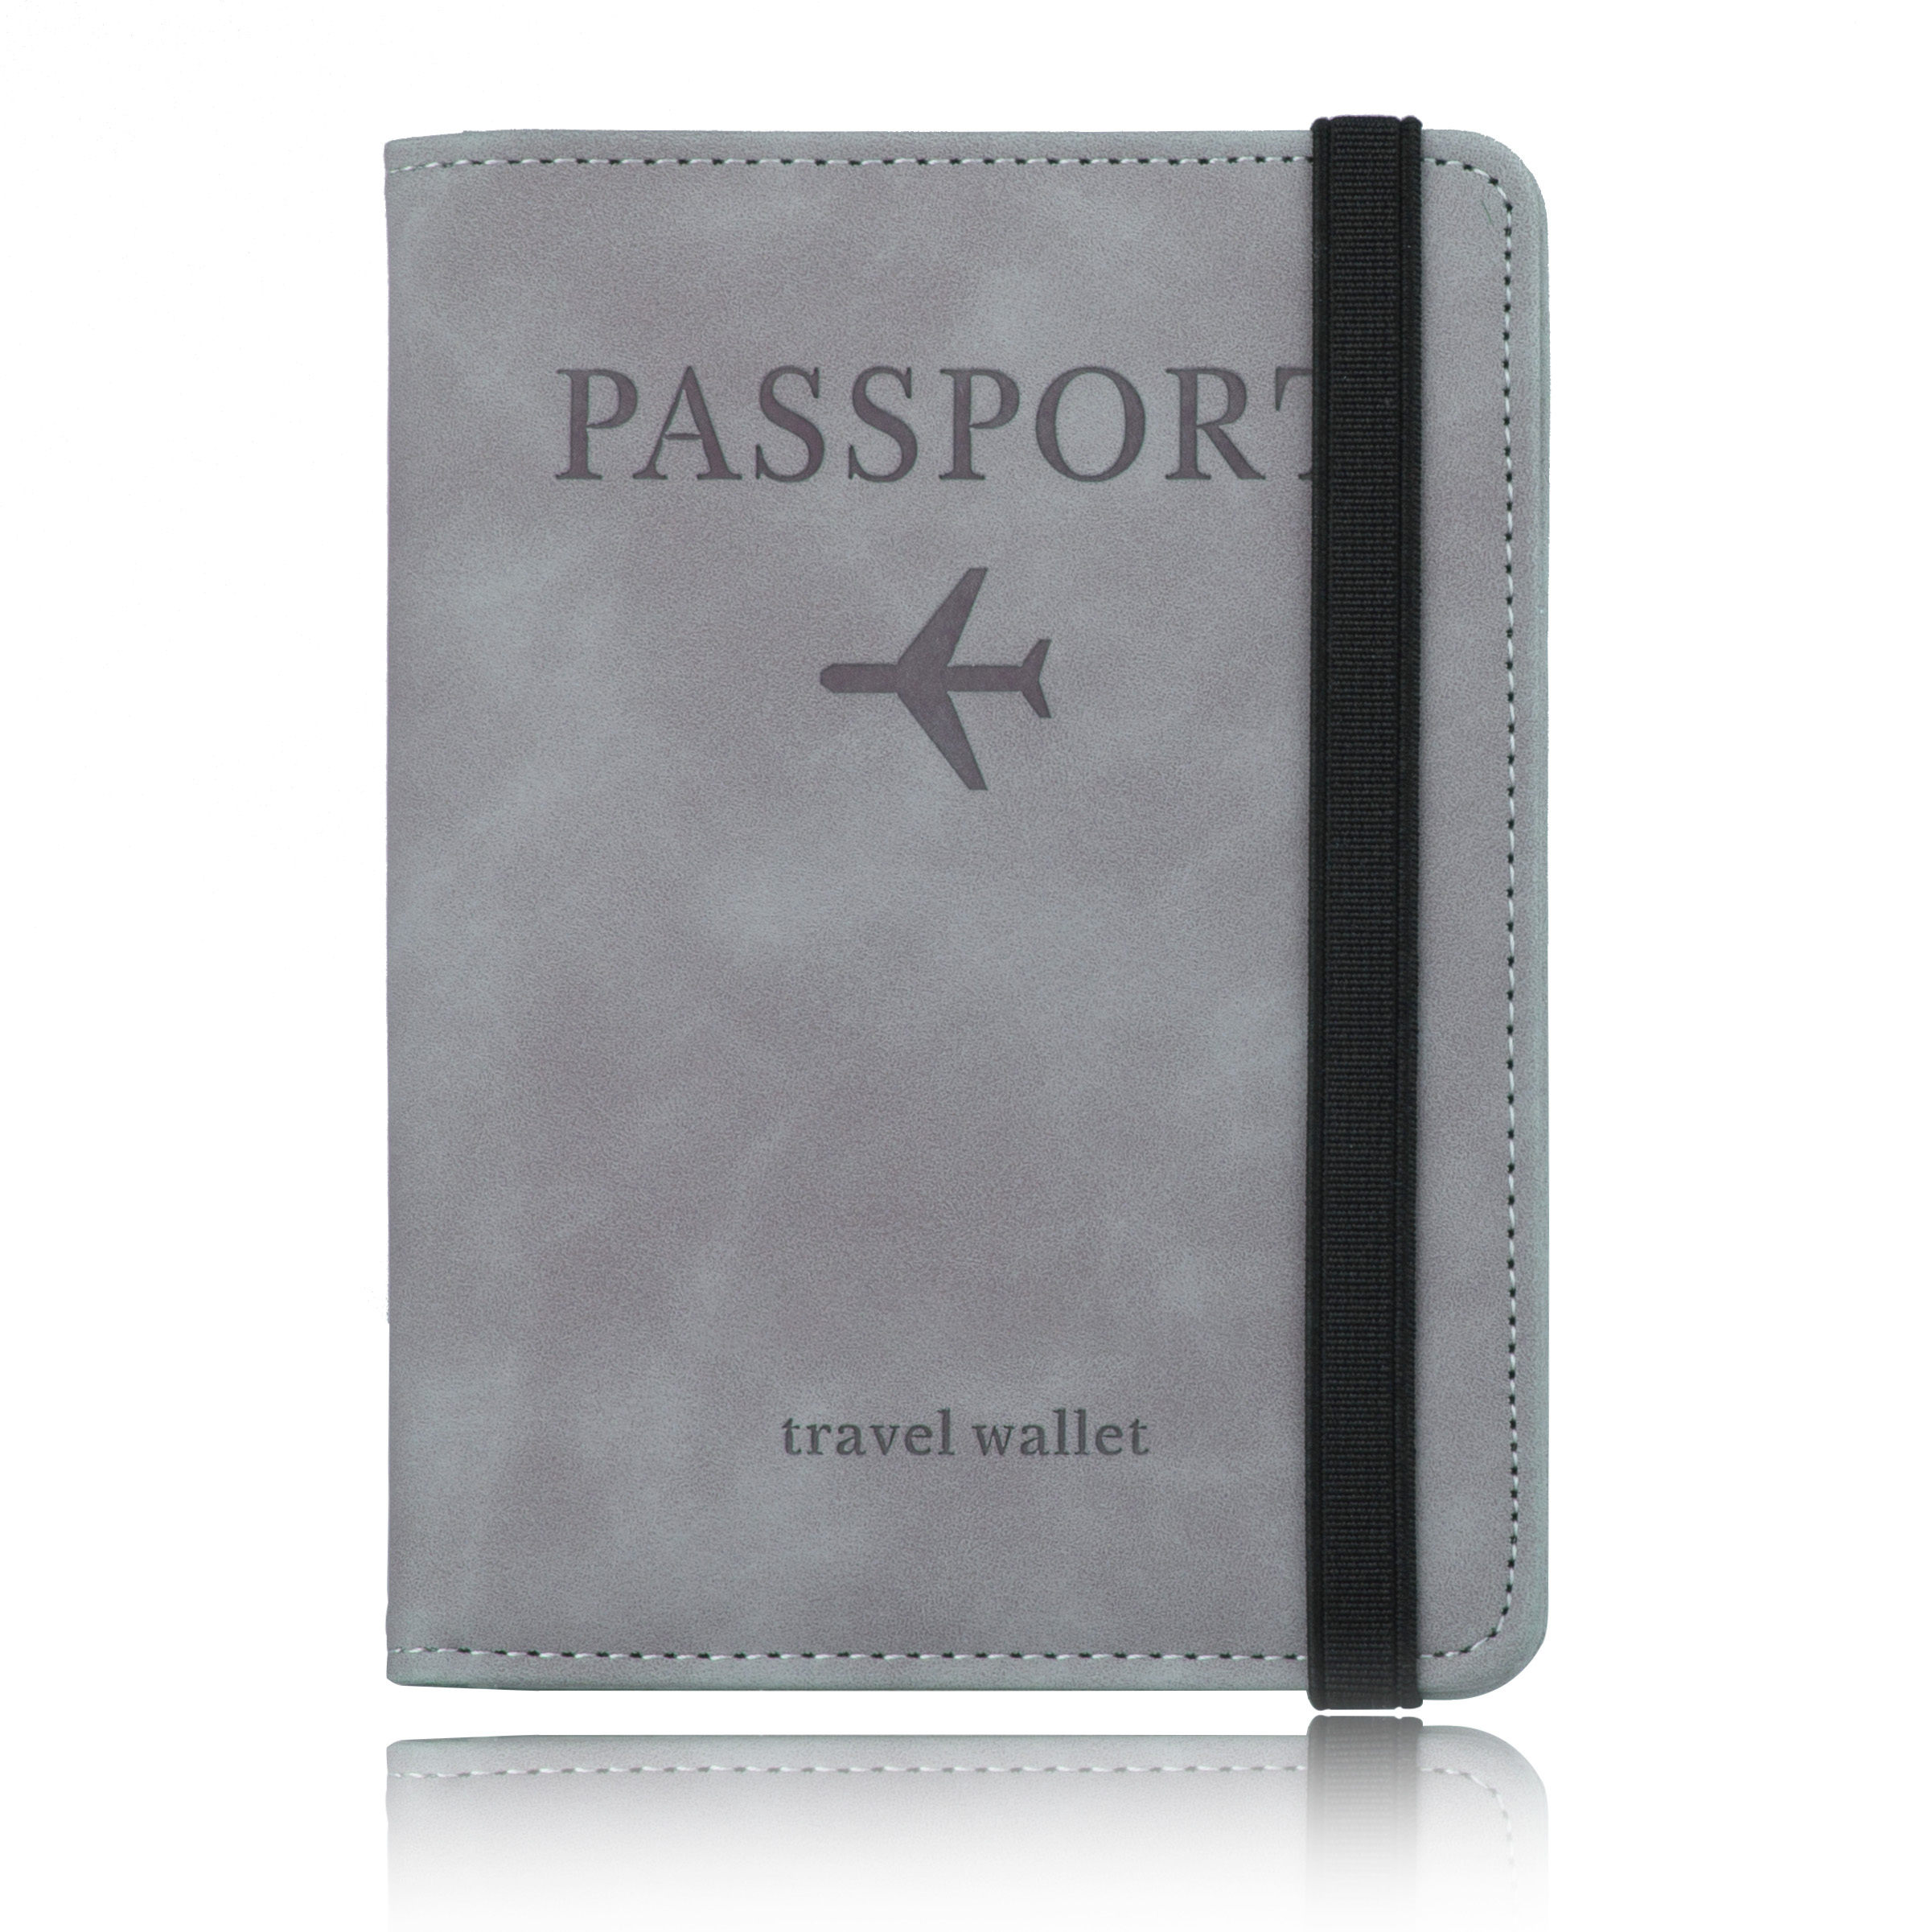 I love the passport holder! Great for those who frequently travel and , louis  vuitton passport cover stamp